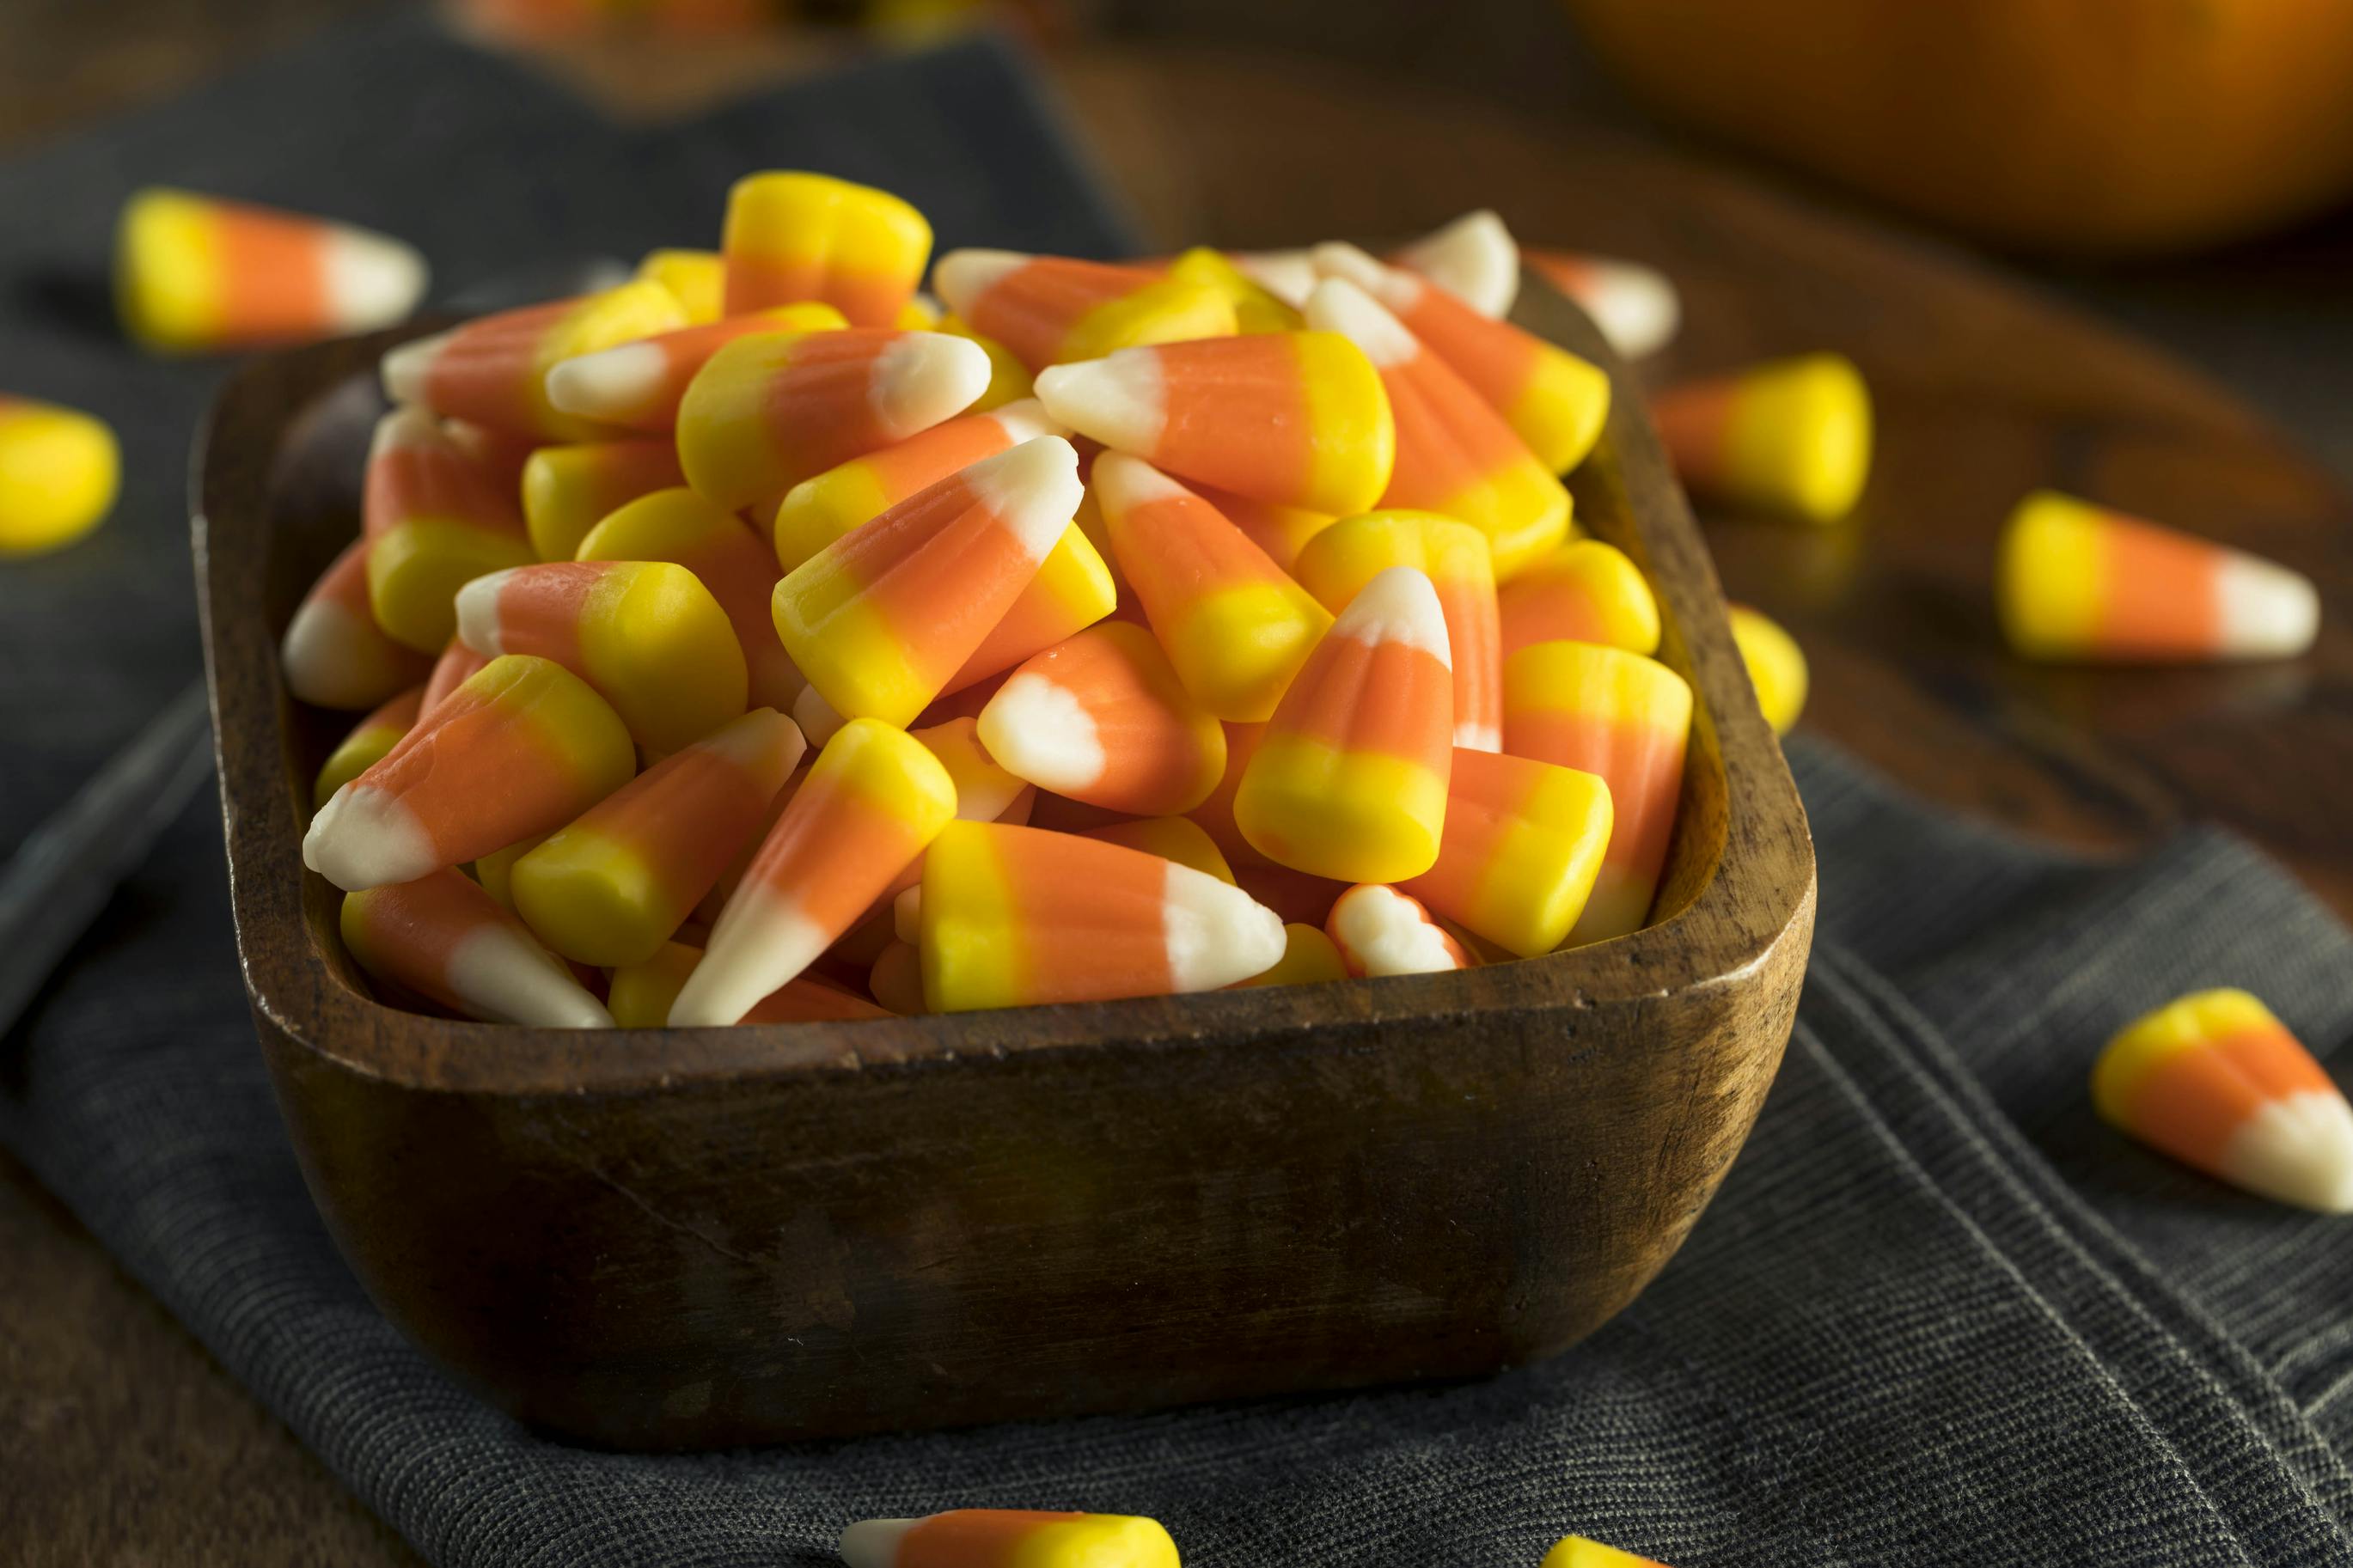 Wooden Bowl Of Candy Corn Dreamstime 2022 1665137967 1665137967 ?auto=compress,format&fit=max